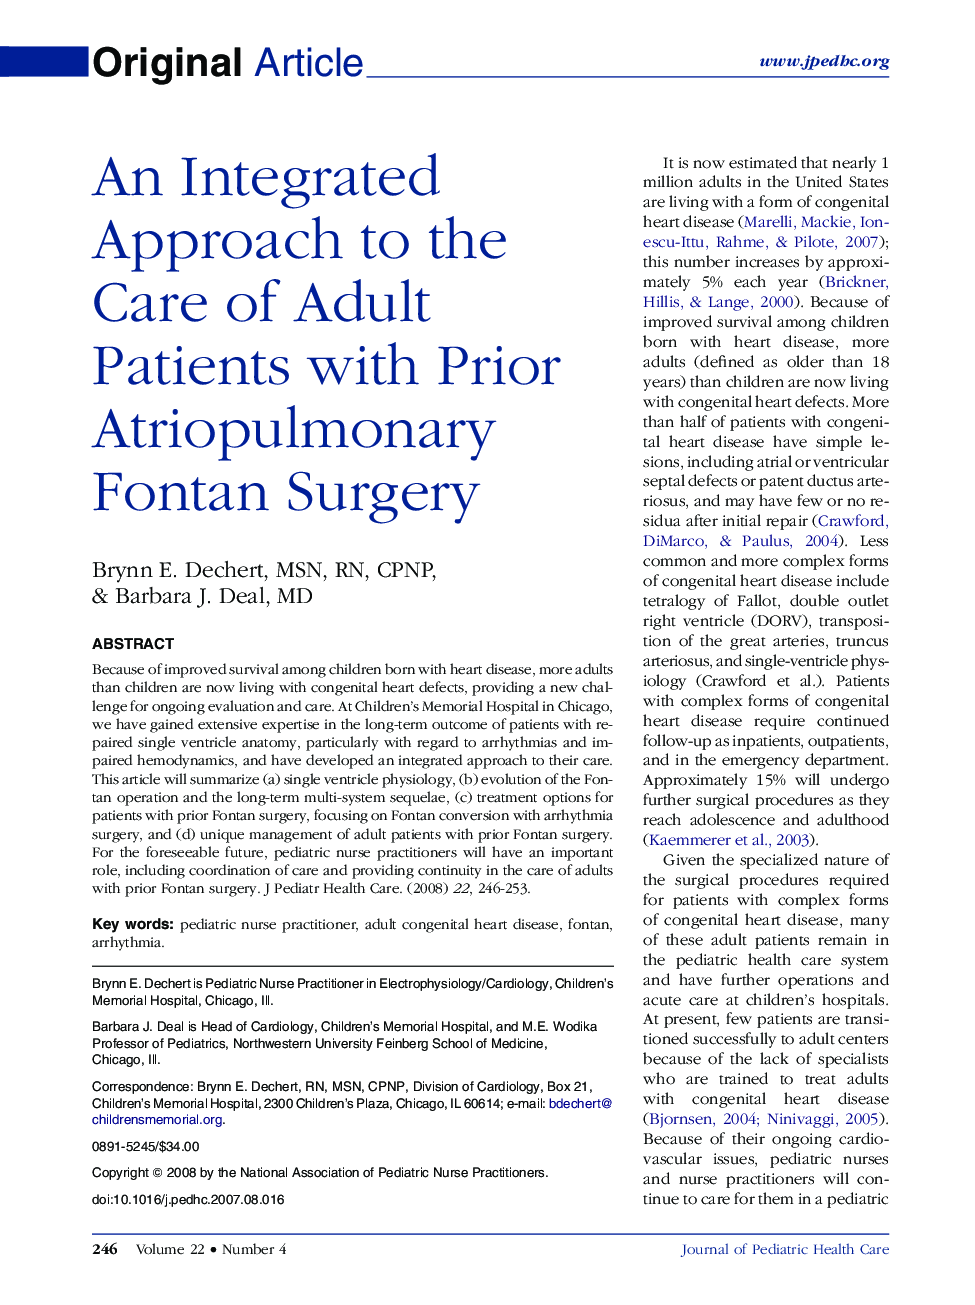 An Integrated Approach to the Care of Adult Patients with Prior Atriopulmonary Fontan Surgery